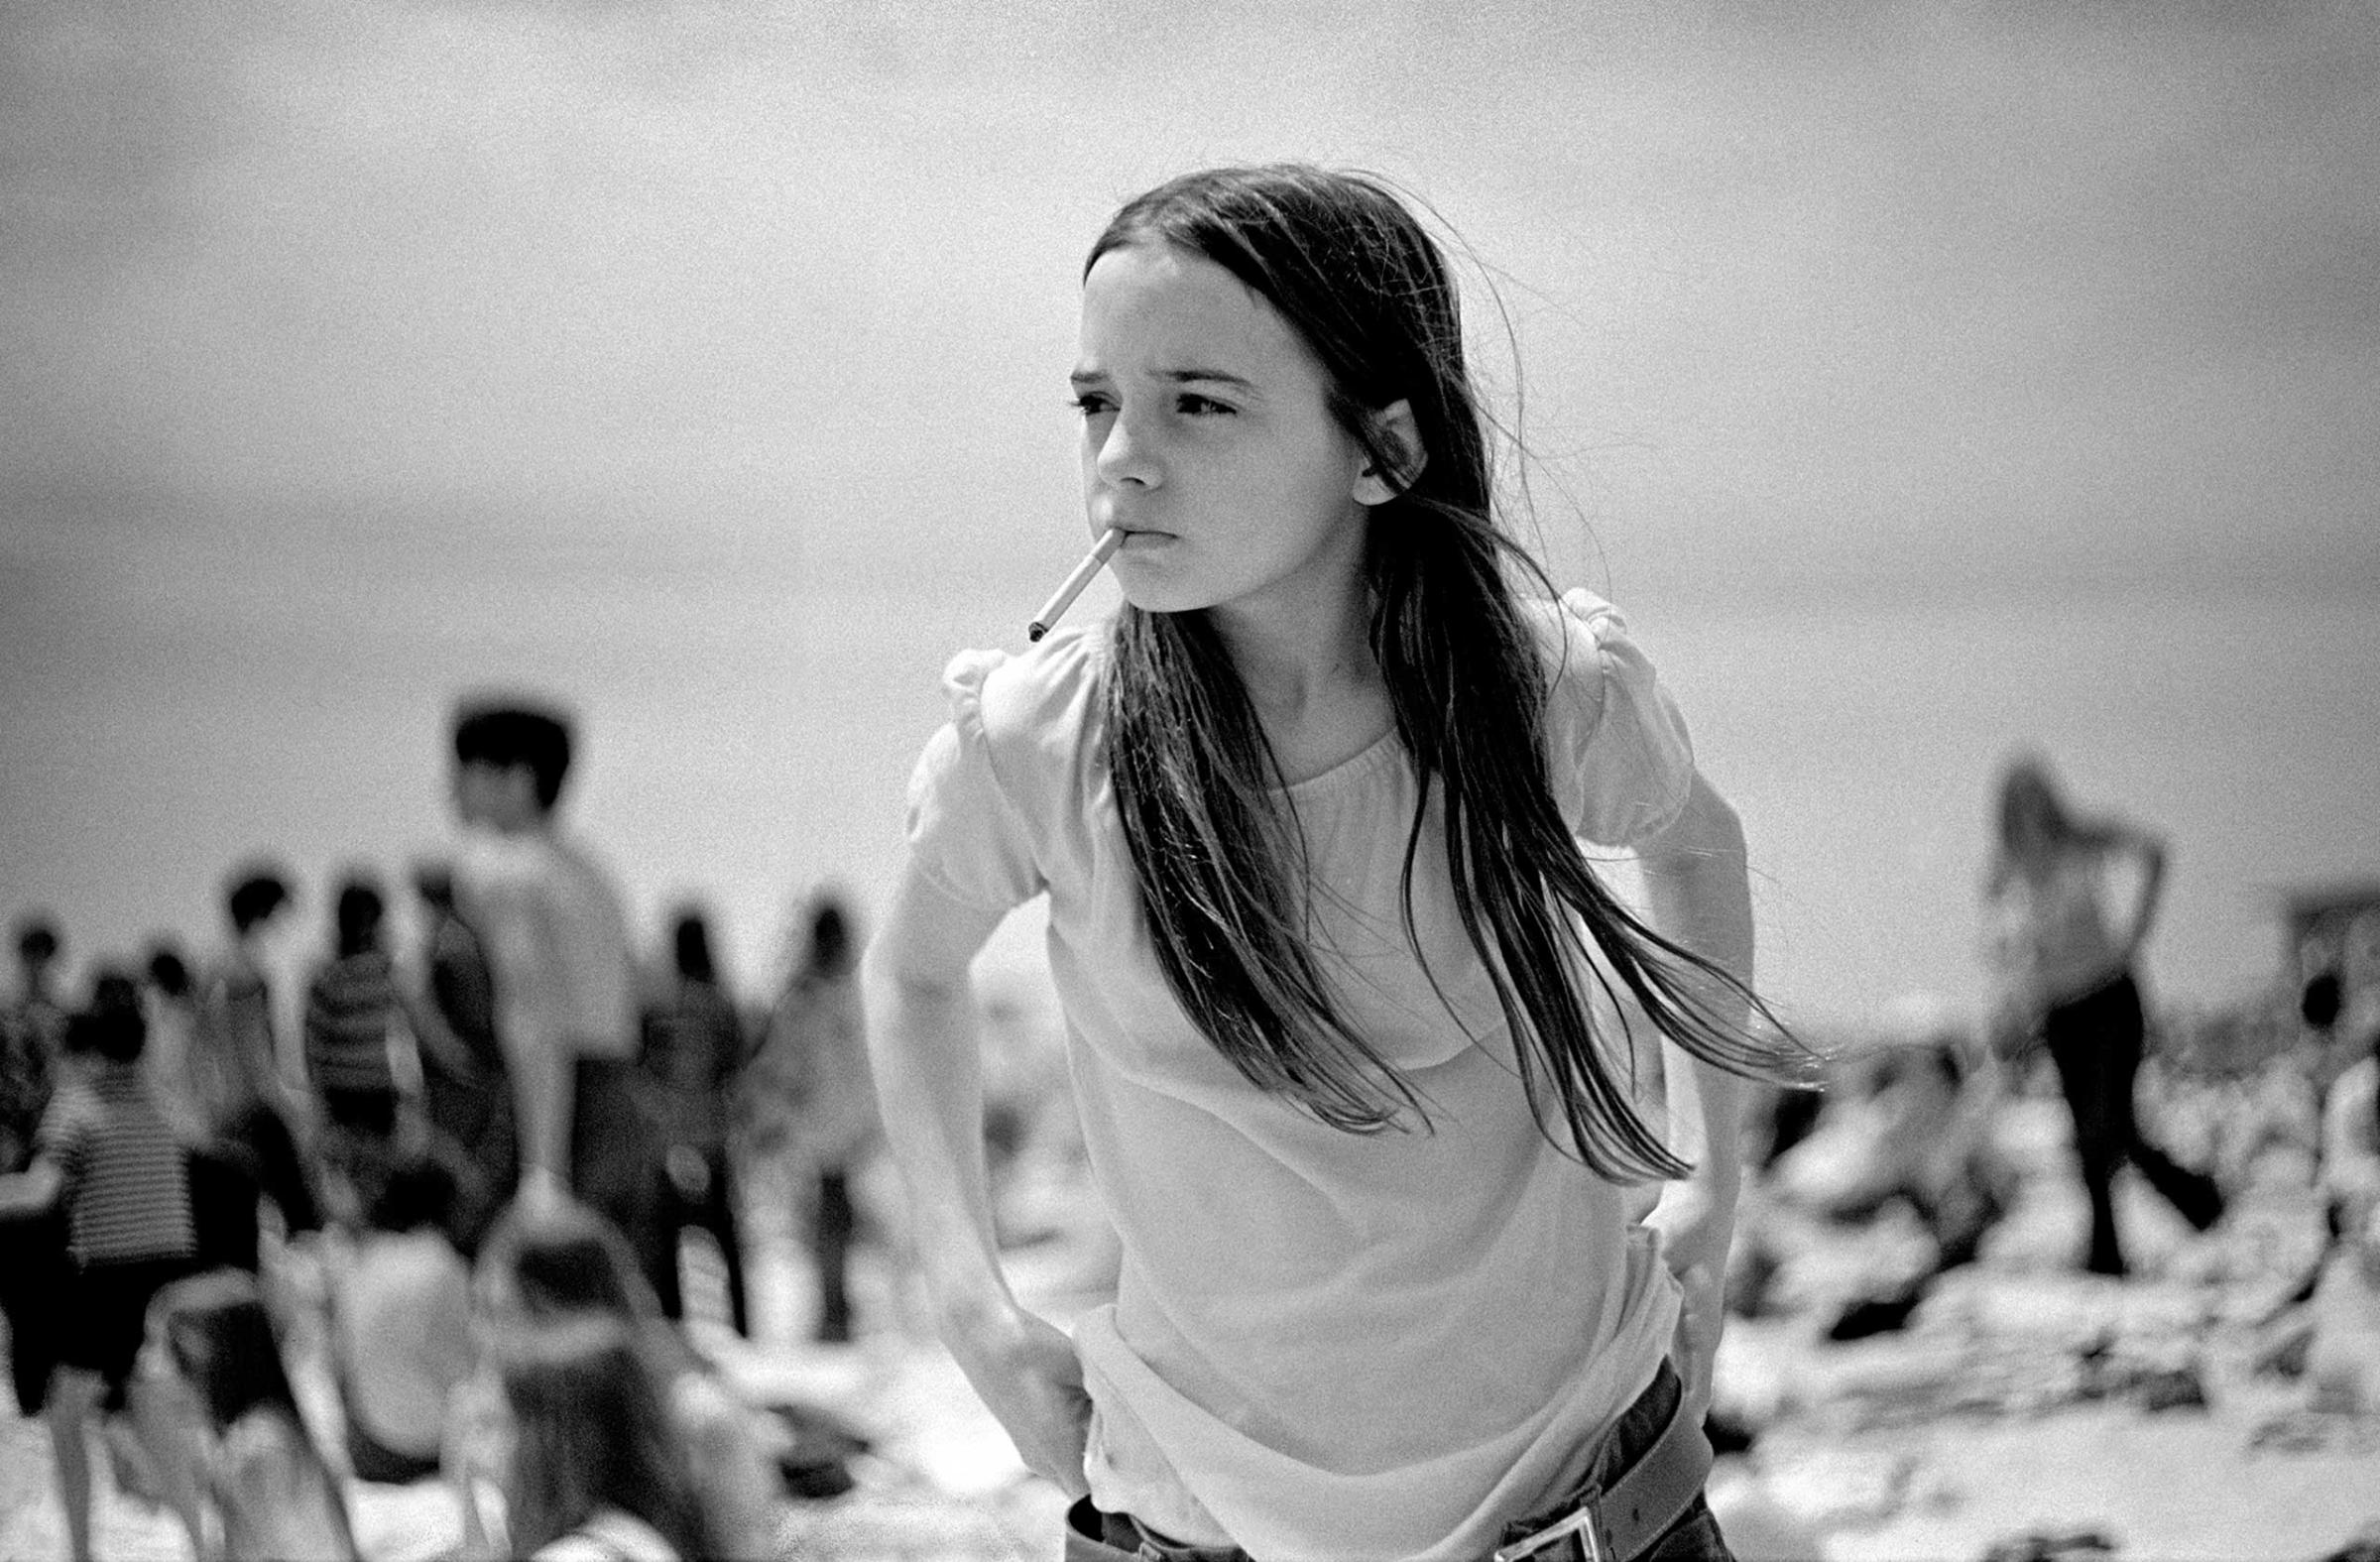 Priscilla, 1969"Priscilla is my favorite photo taken at Jones Beach; Priscilla seems to embody strength and determination and the quality of a timeless image."